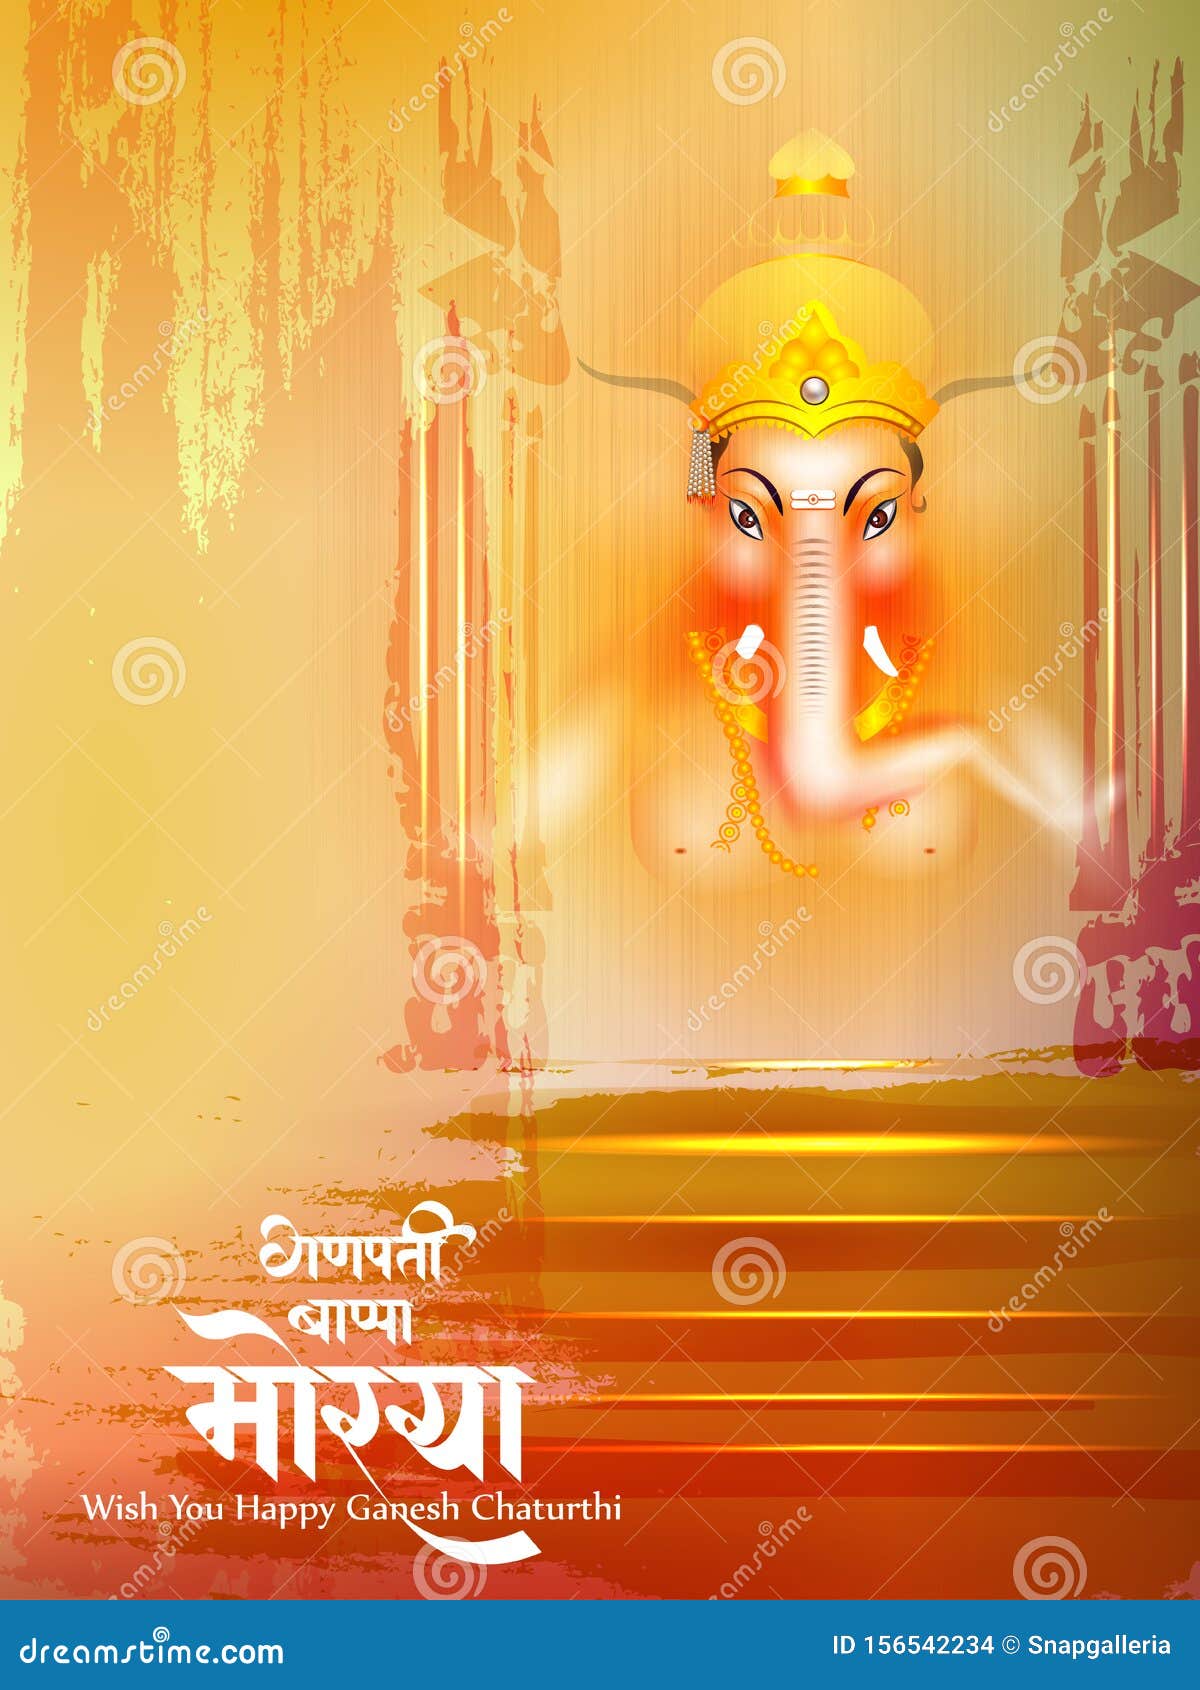 Lord Ganpati on Ganesh Chaturthi Background and Message in Hindi Meaning Oh  My Lord Ganesha Stock Vector - Illustration of indian, devotion: 156542234